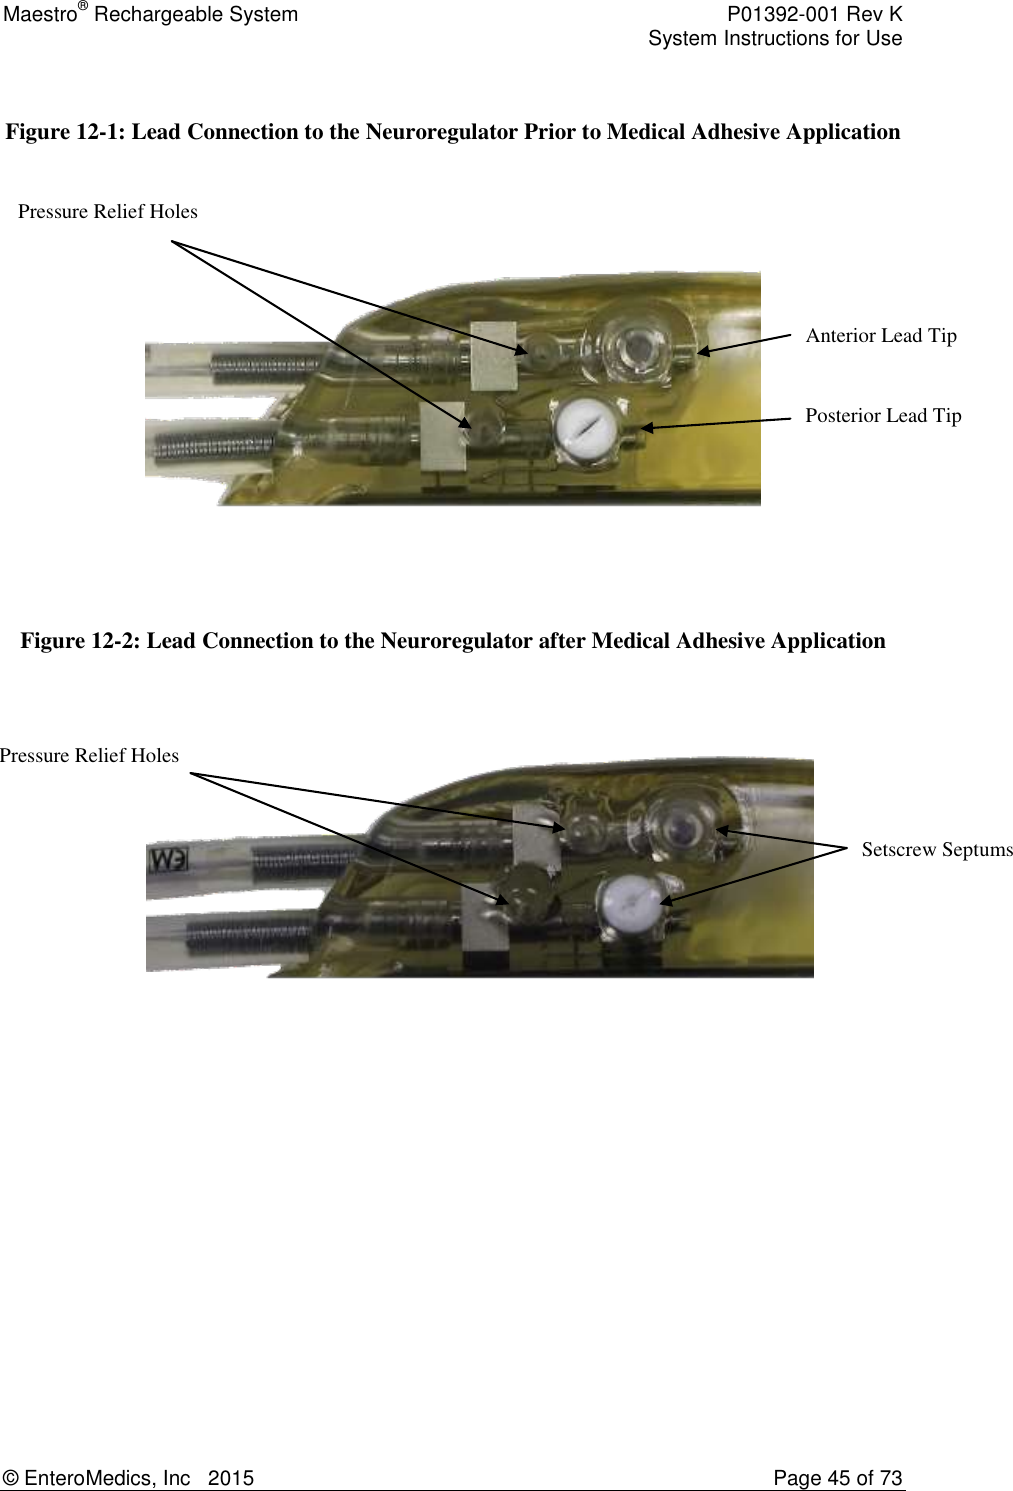 Maestro® Rechargeable System    P01392-001 Rev K     System Instructions for Use  © EnteroMedics, Inc   2015  Page 45 of 73  Pressure Relief Holes Setscrew Septums Anterior Lead Tip Pressure Relief Holes Posterior Lead Tip  Figure 12-1: Lead Connection to the Neuroregulator Prior to Medical Adhesive Application      Figure 12-2: Lead Connection to the Neuroregulator after Medical Adhesive Application   